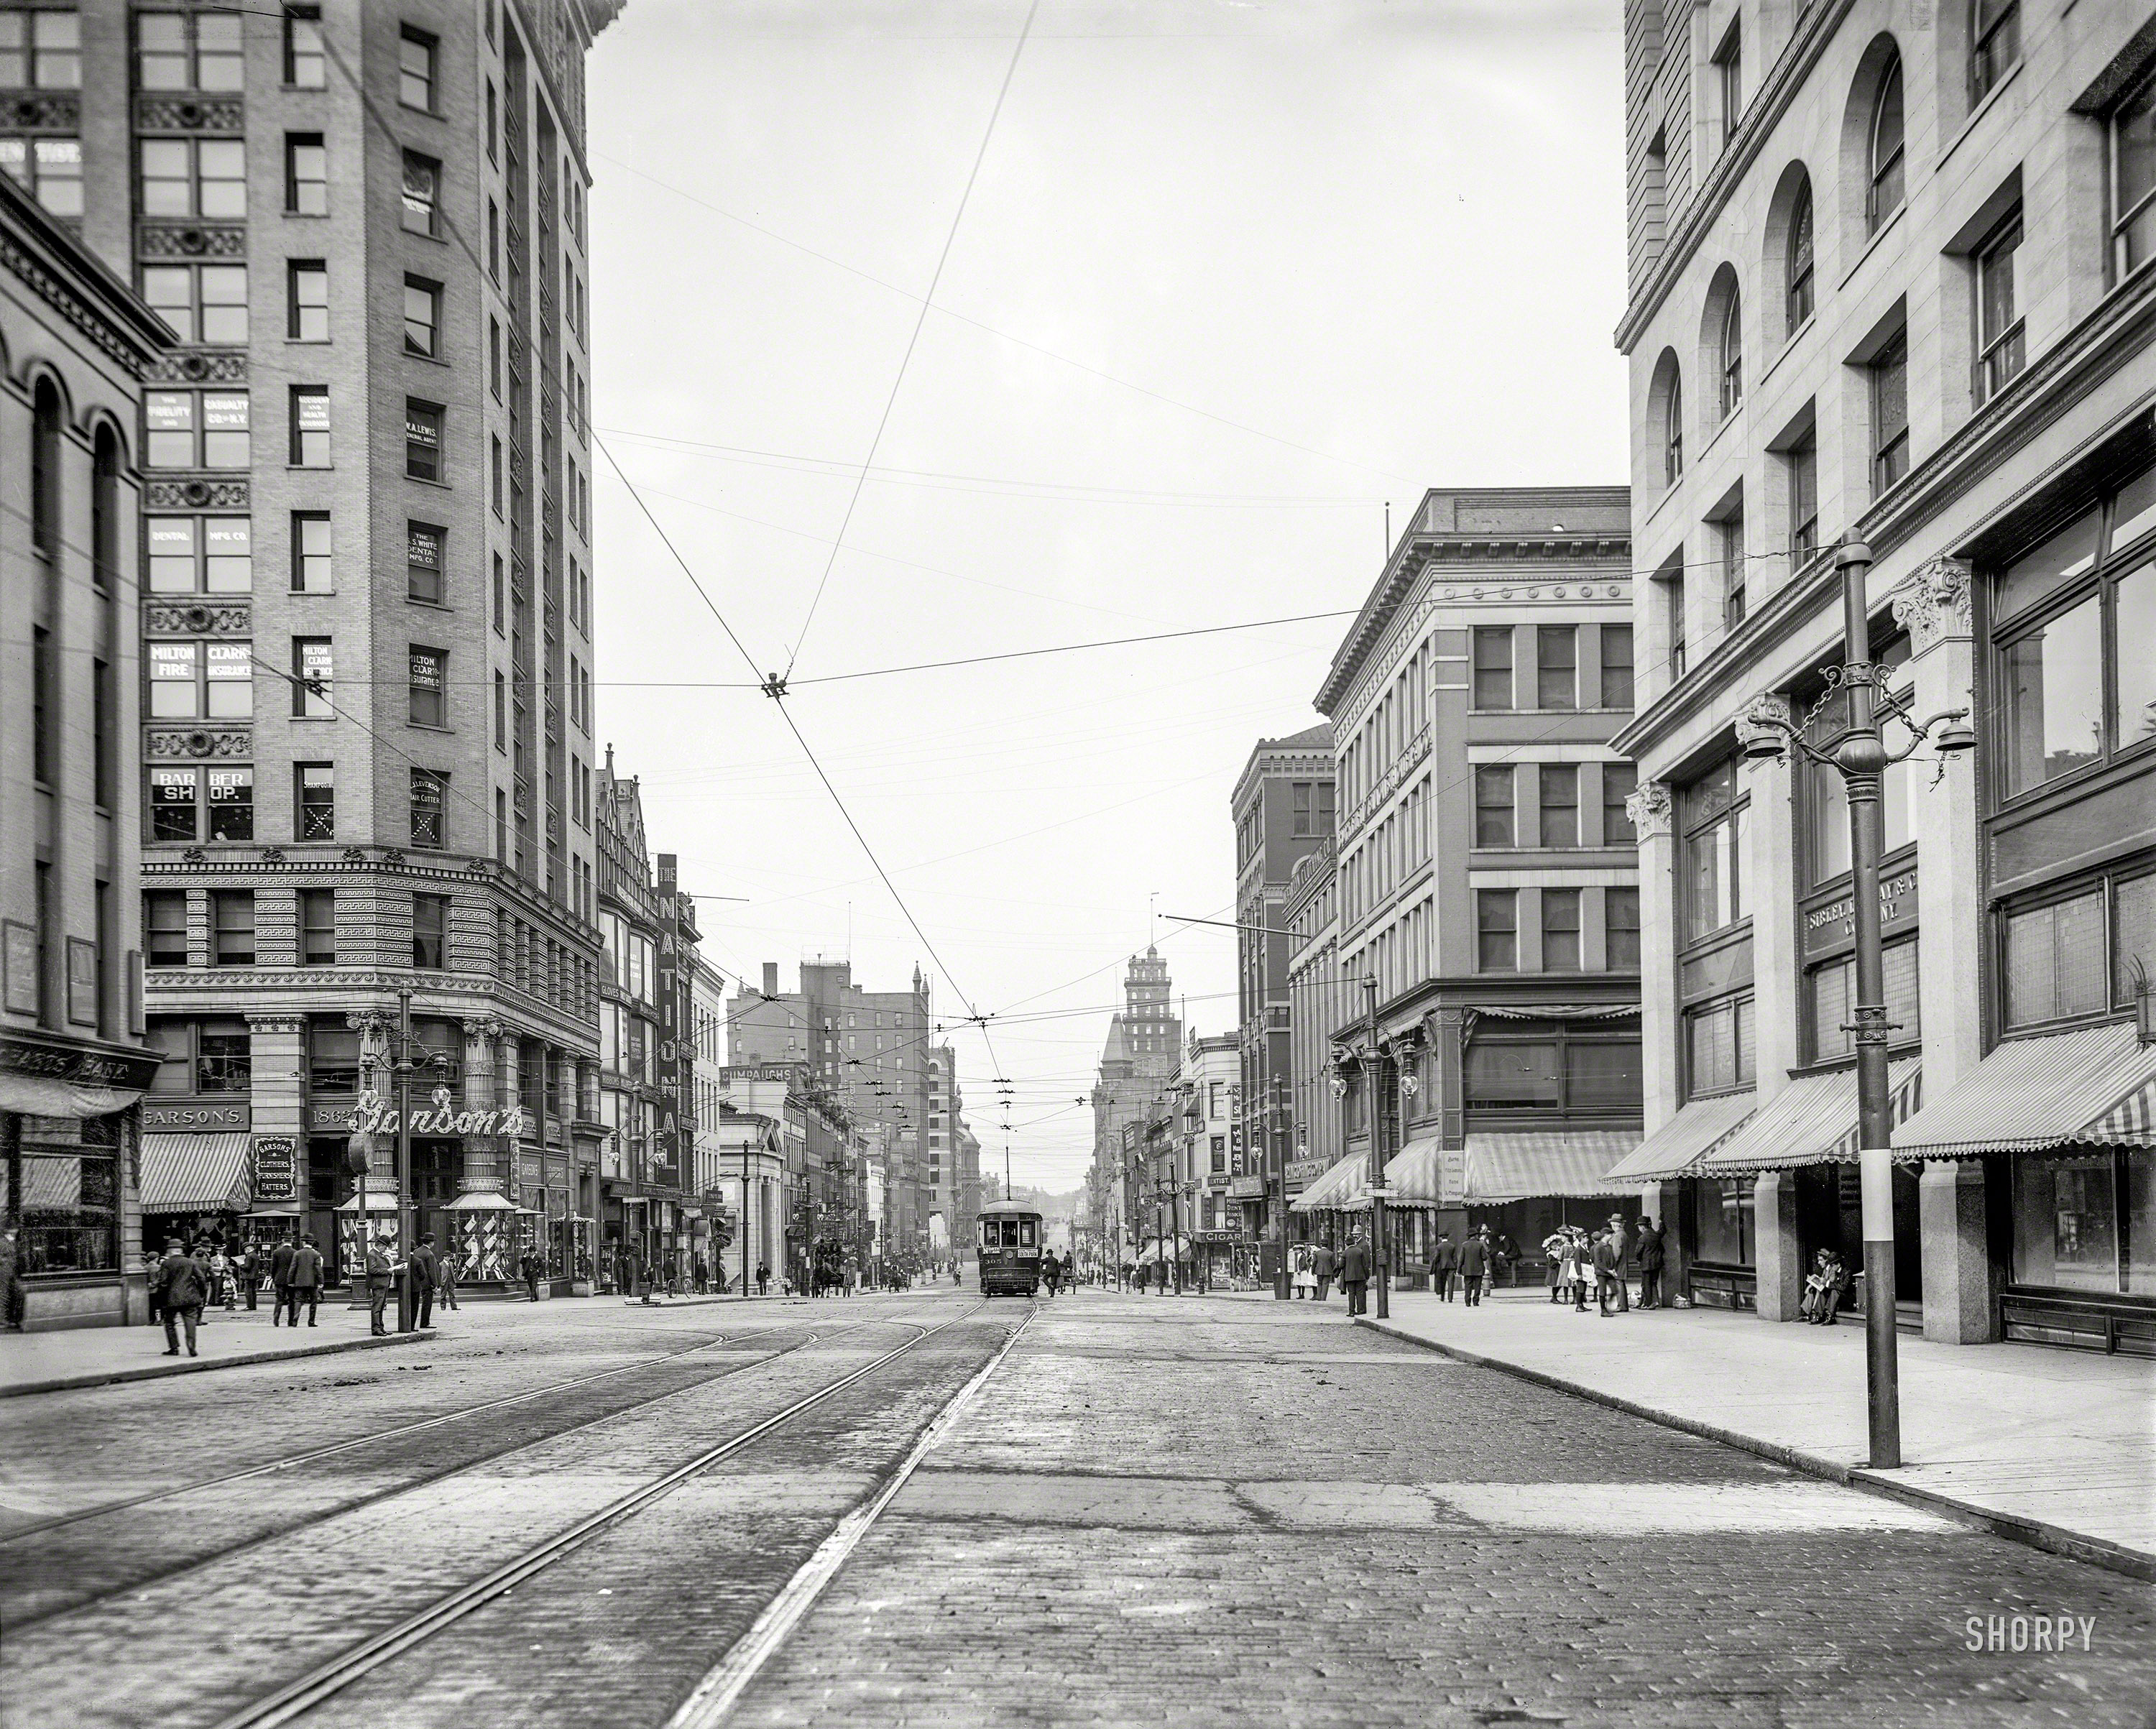 Rochester, New York, circa 1904. "East Main Street at South Avenue and St. Paul Boulevard." A sartorial crossroads anchored by Garson's Clothiers. 8x10 inch dry plate glass negative, Detroit Photographic Company. View full size.